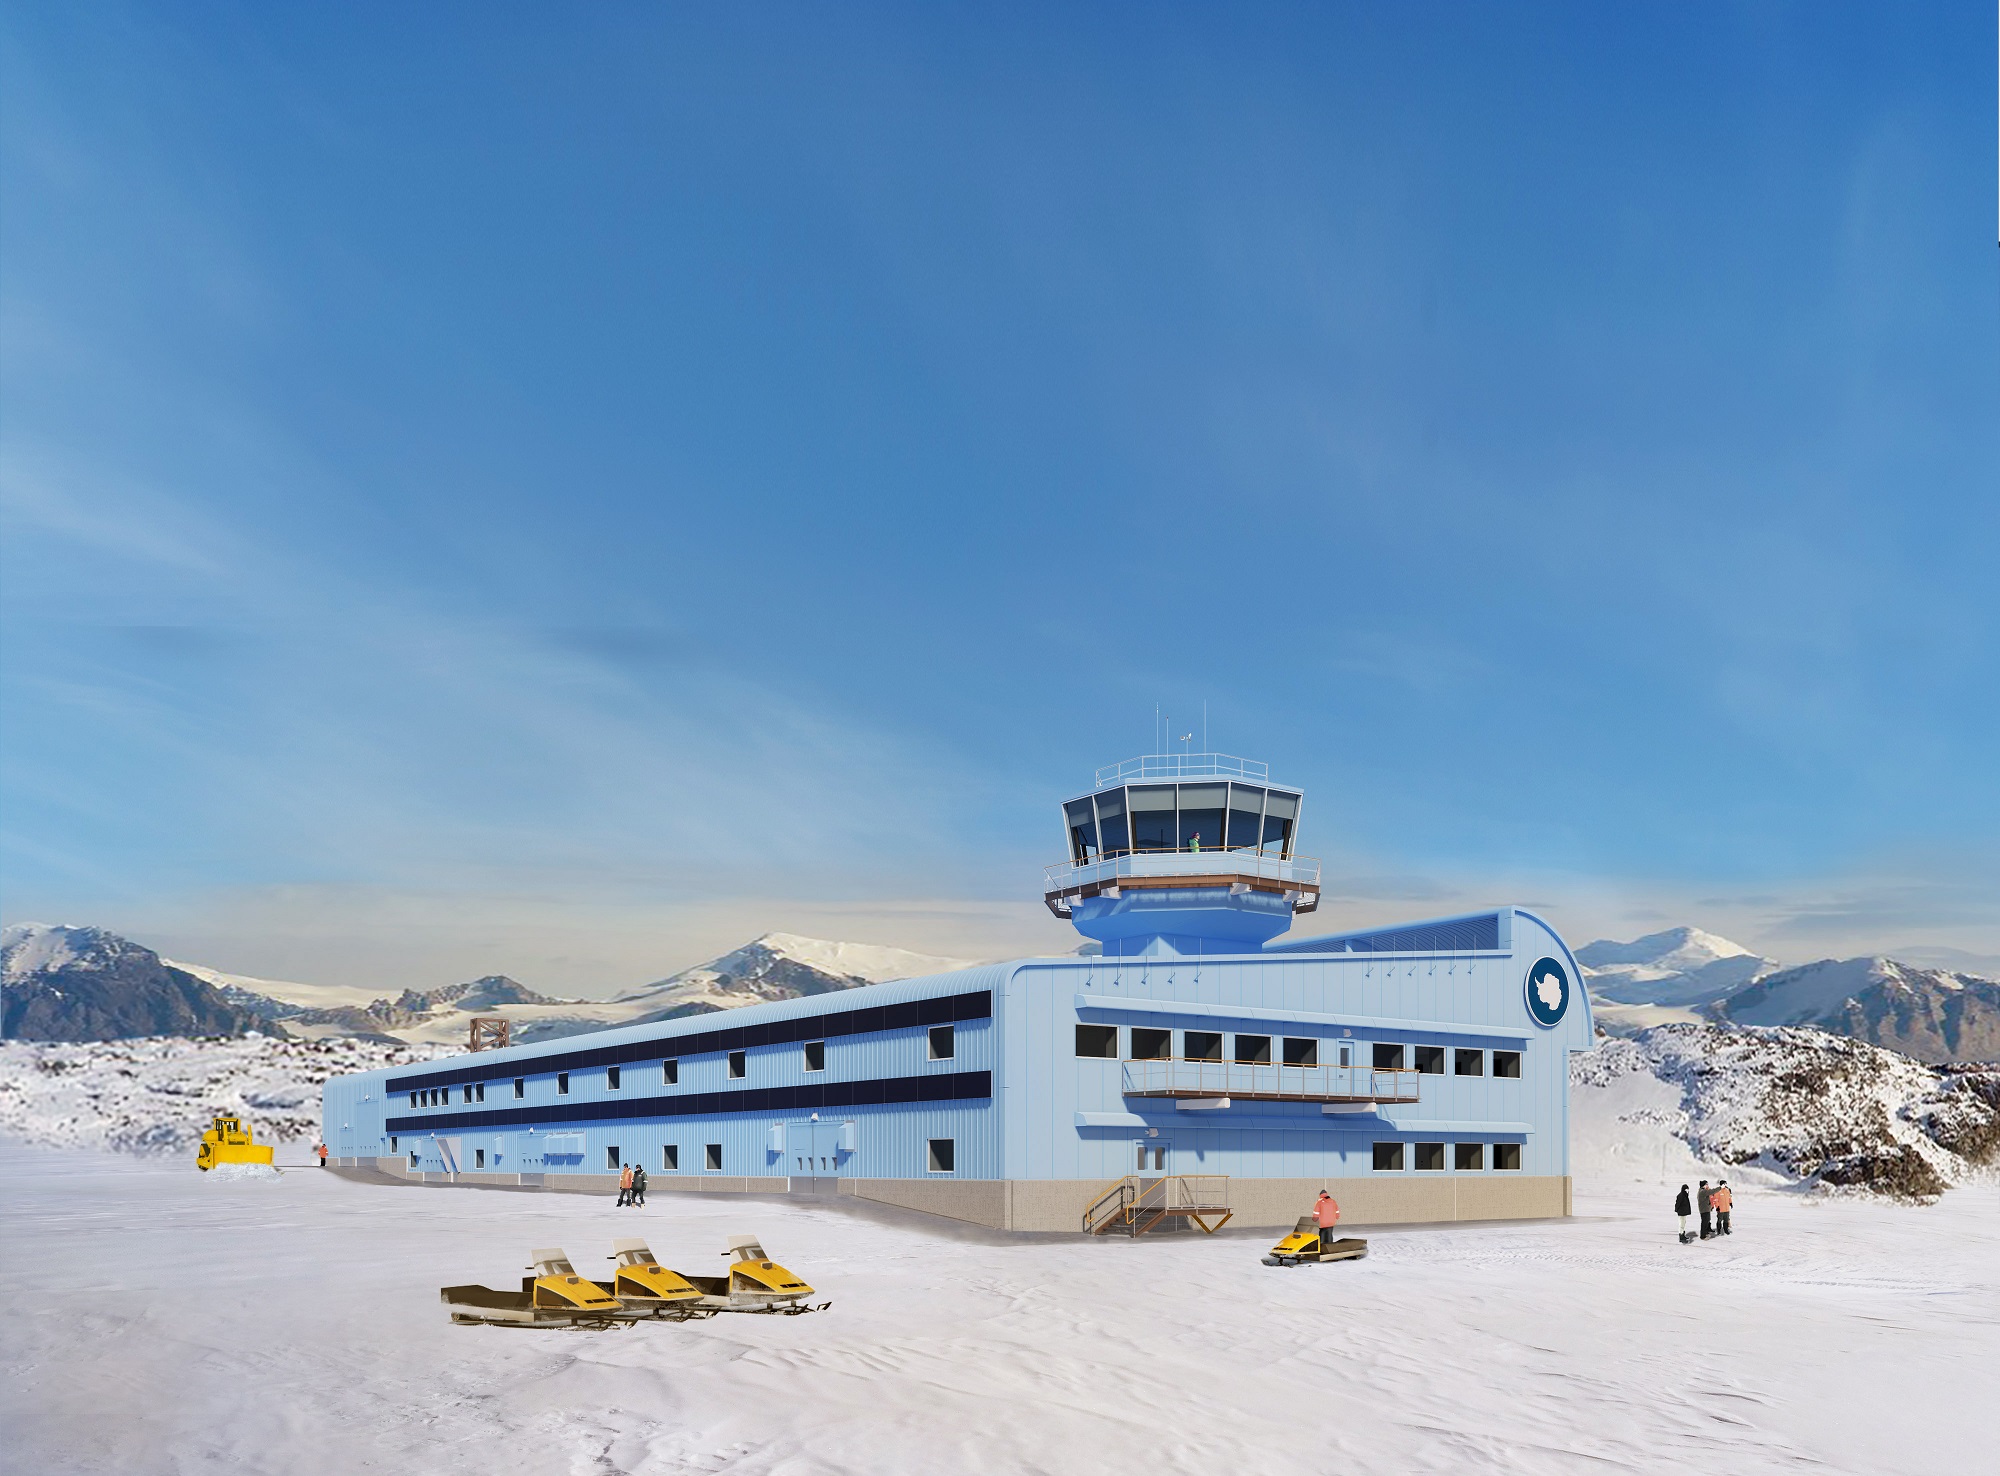 And finally... Construction season starts at UK’s largest Antarctic science research hub